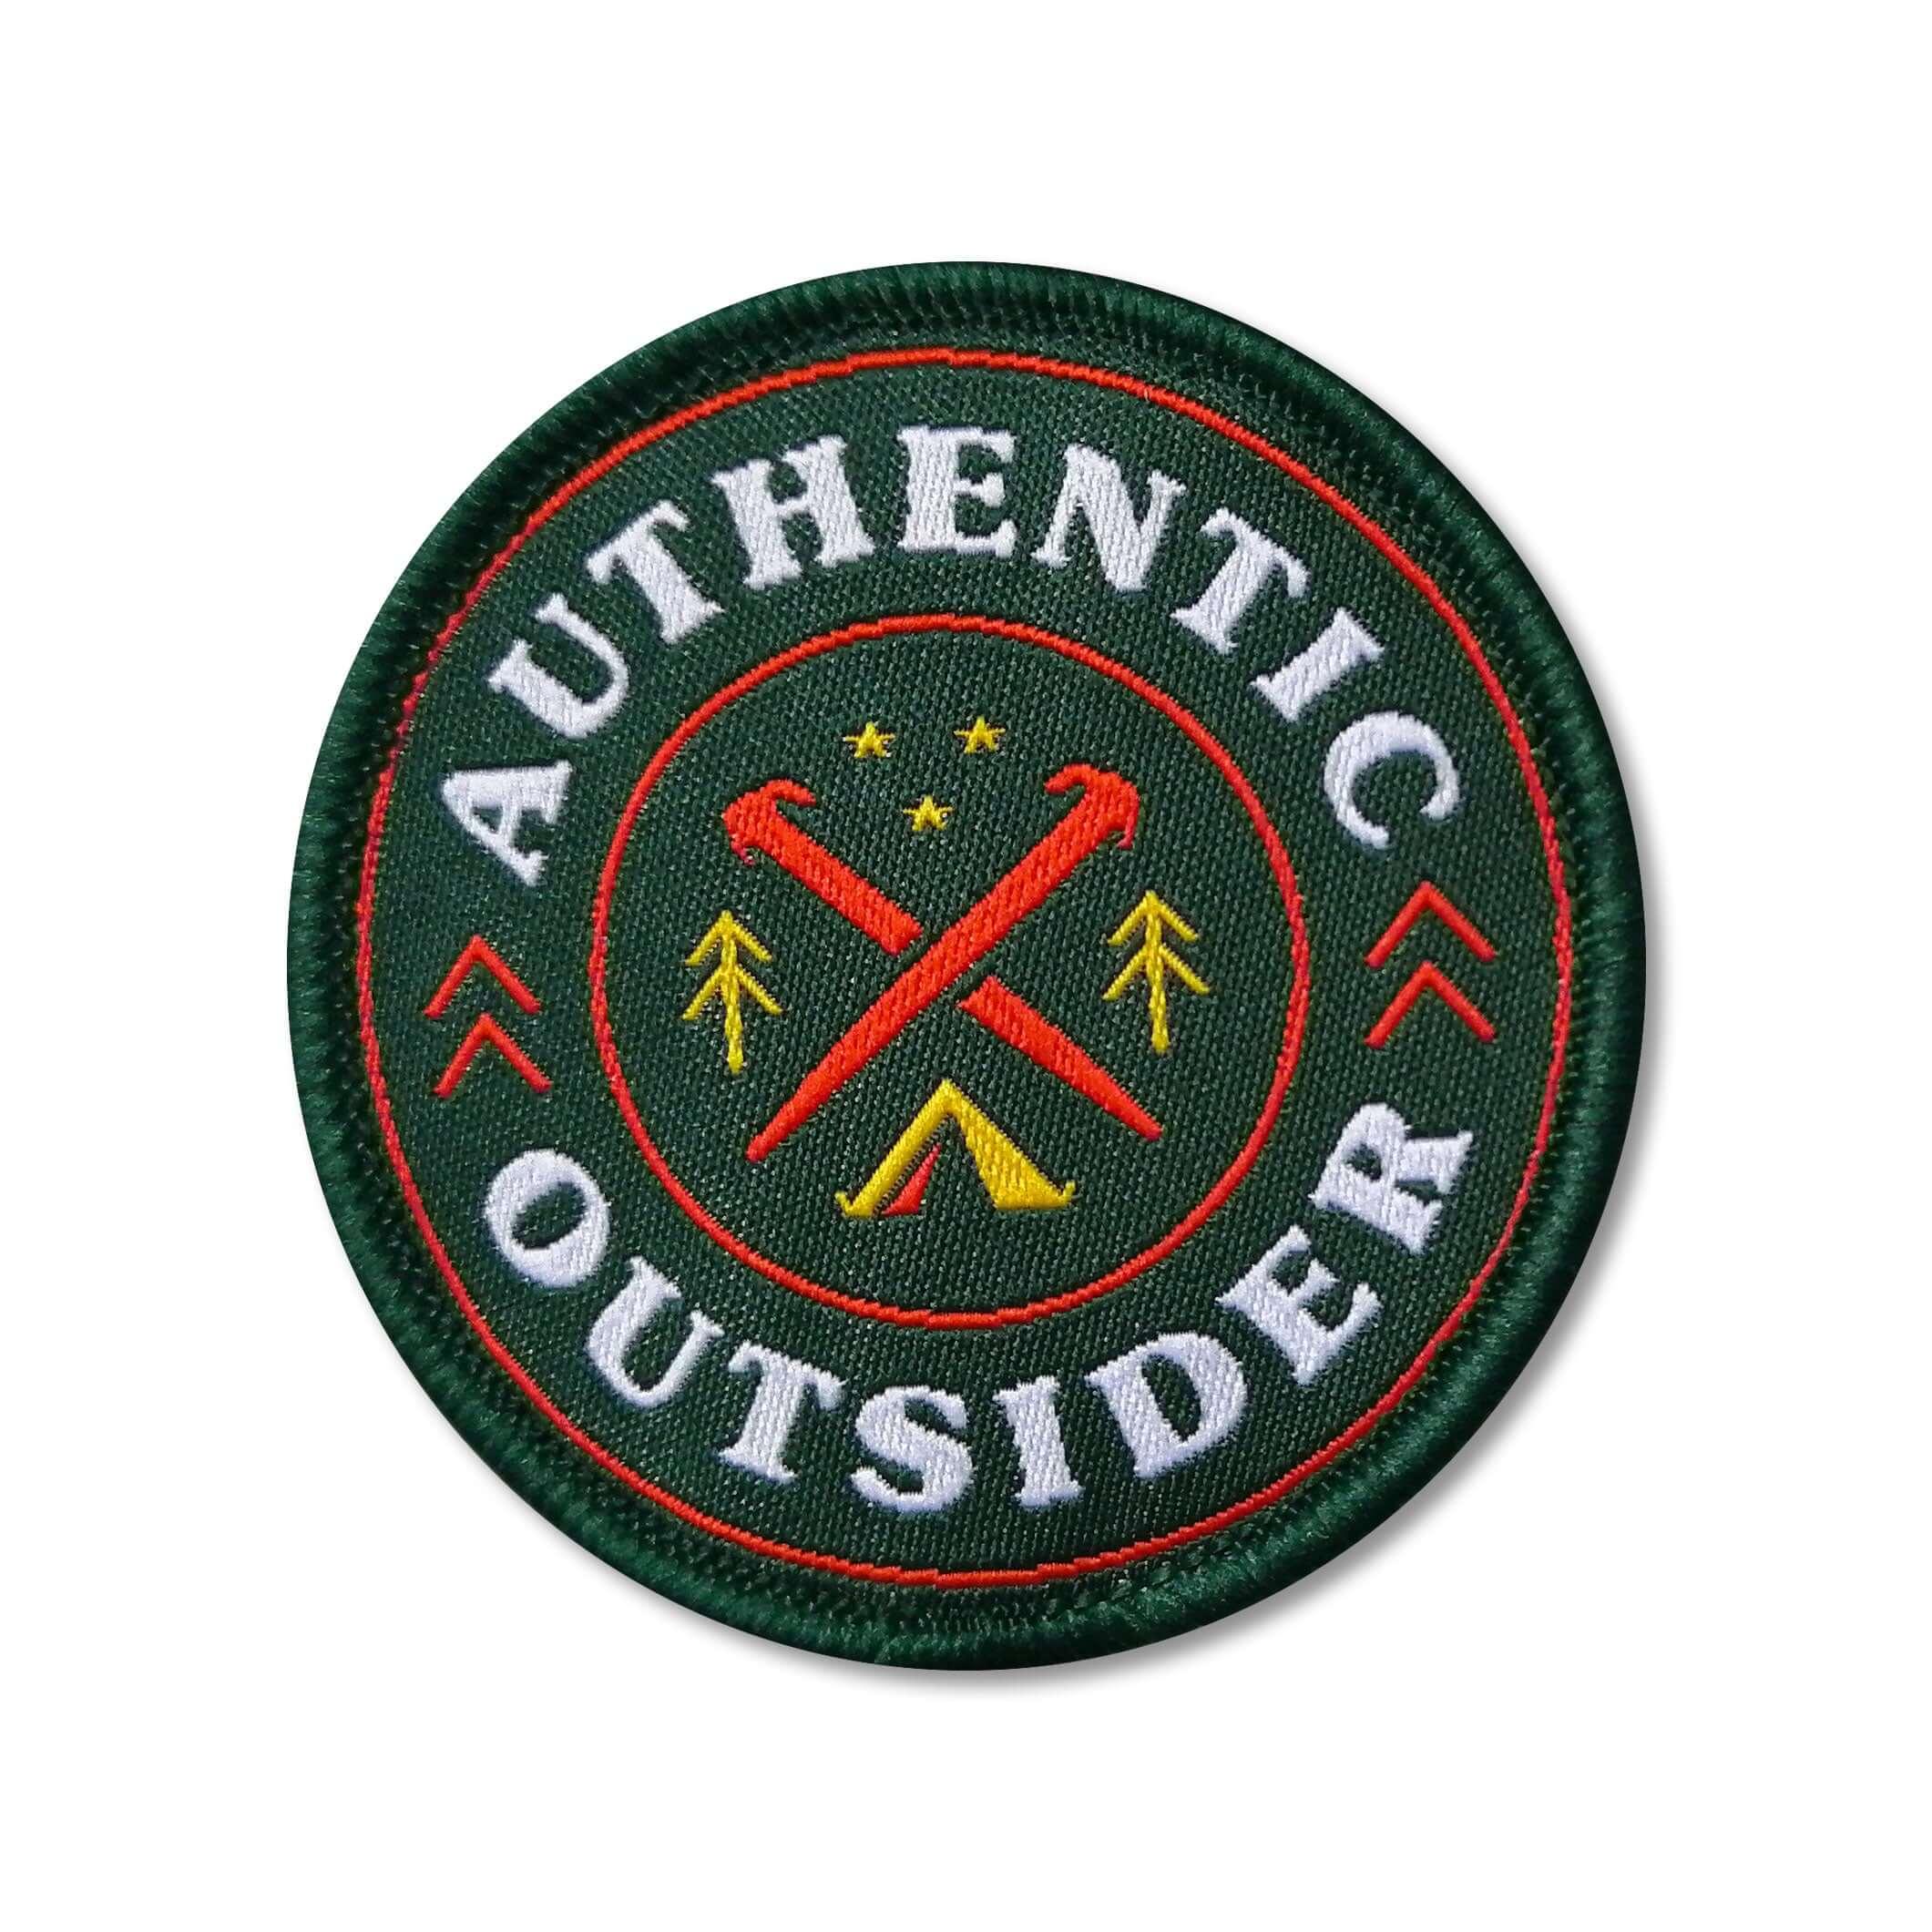 Authentic Outsider Patch - Rocket Factory Apparel